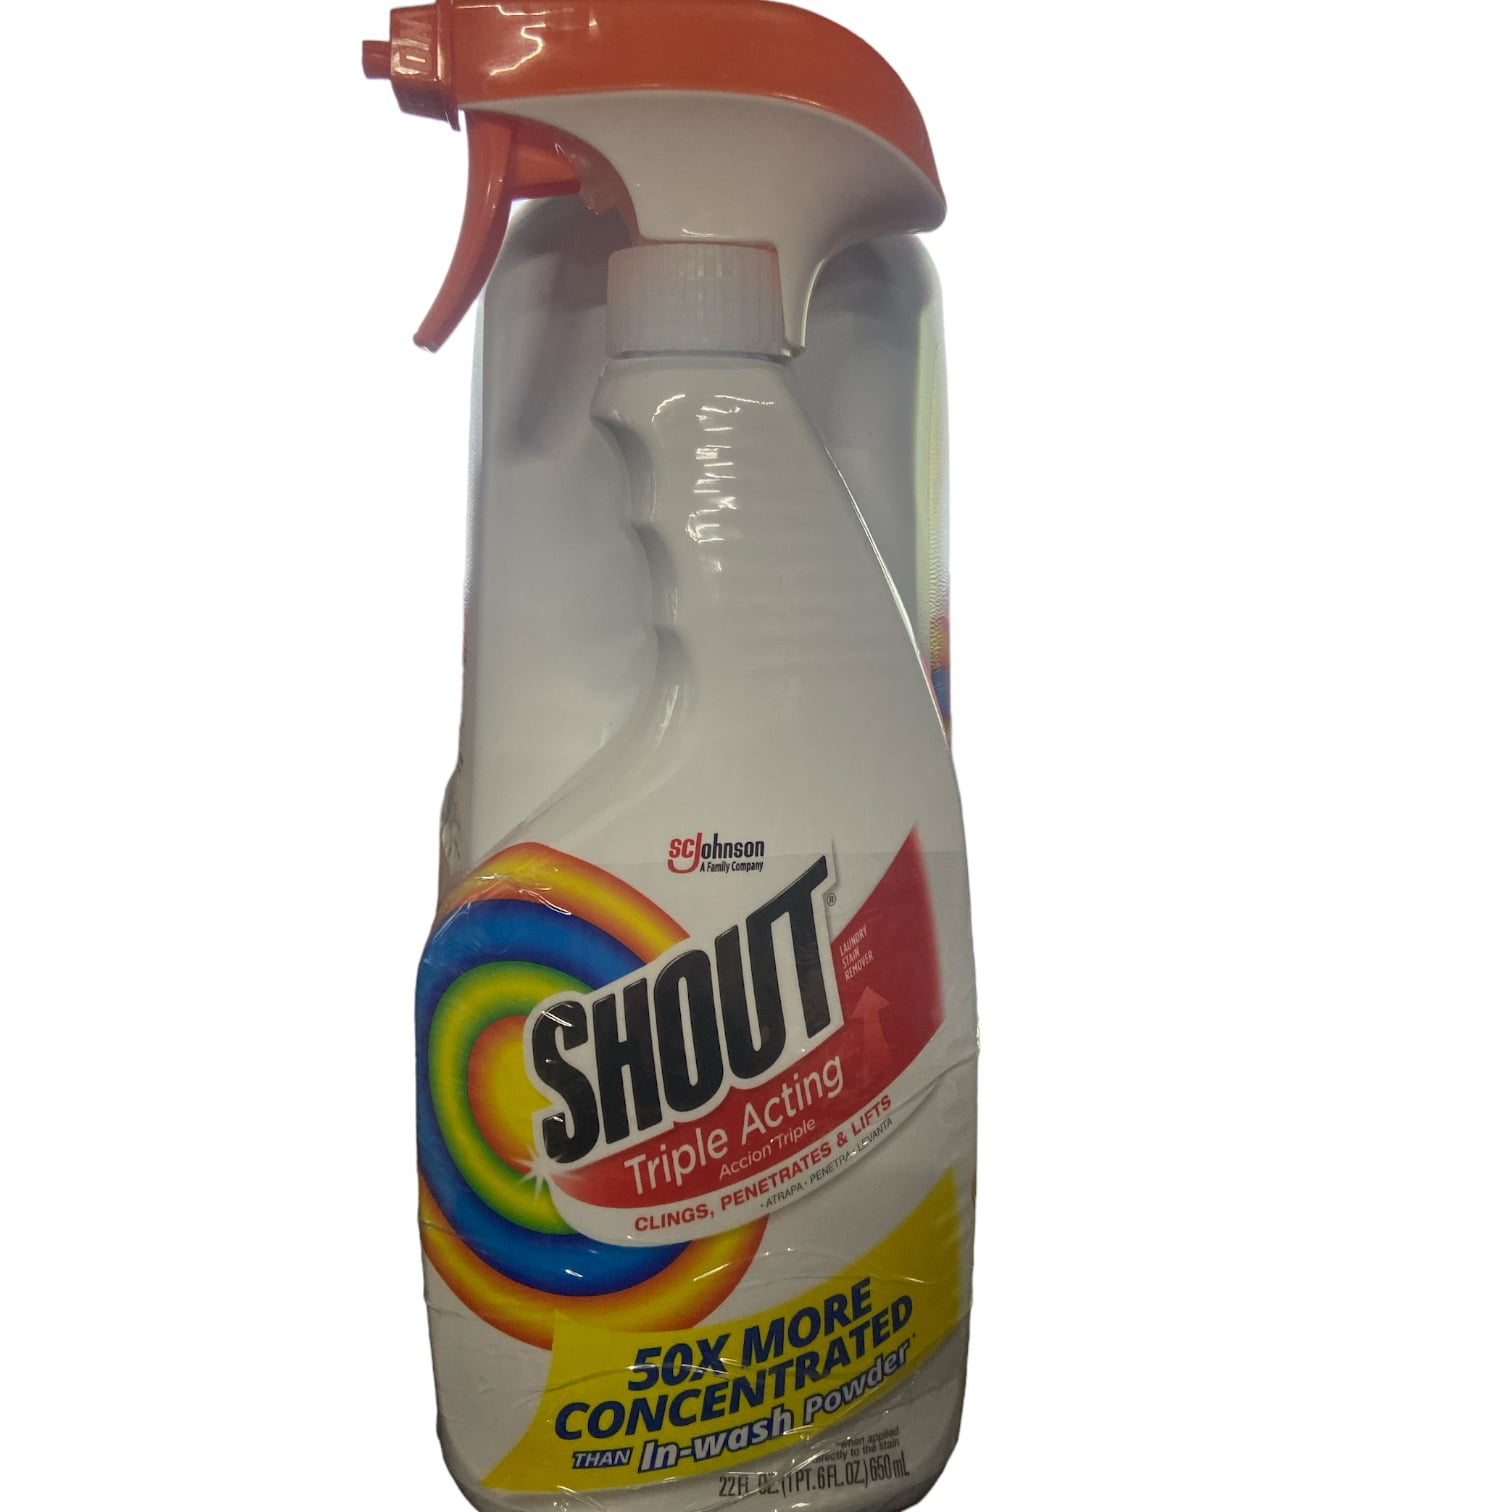 Shout Triple-Acting Laundry Stain Remover (128 fl. oz. refill - 22 fl. –  Openbax